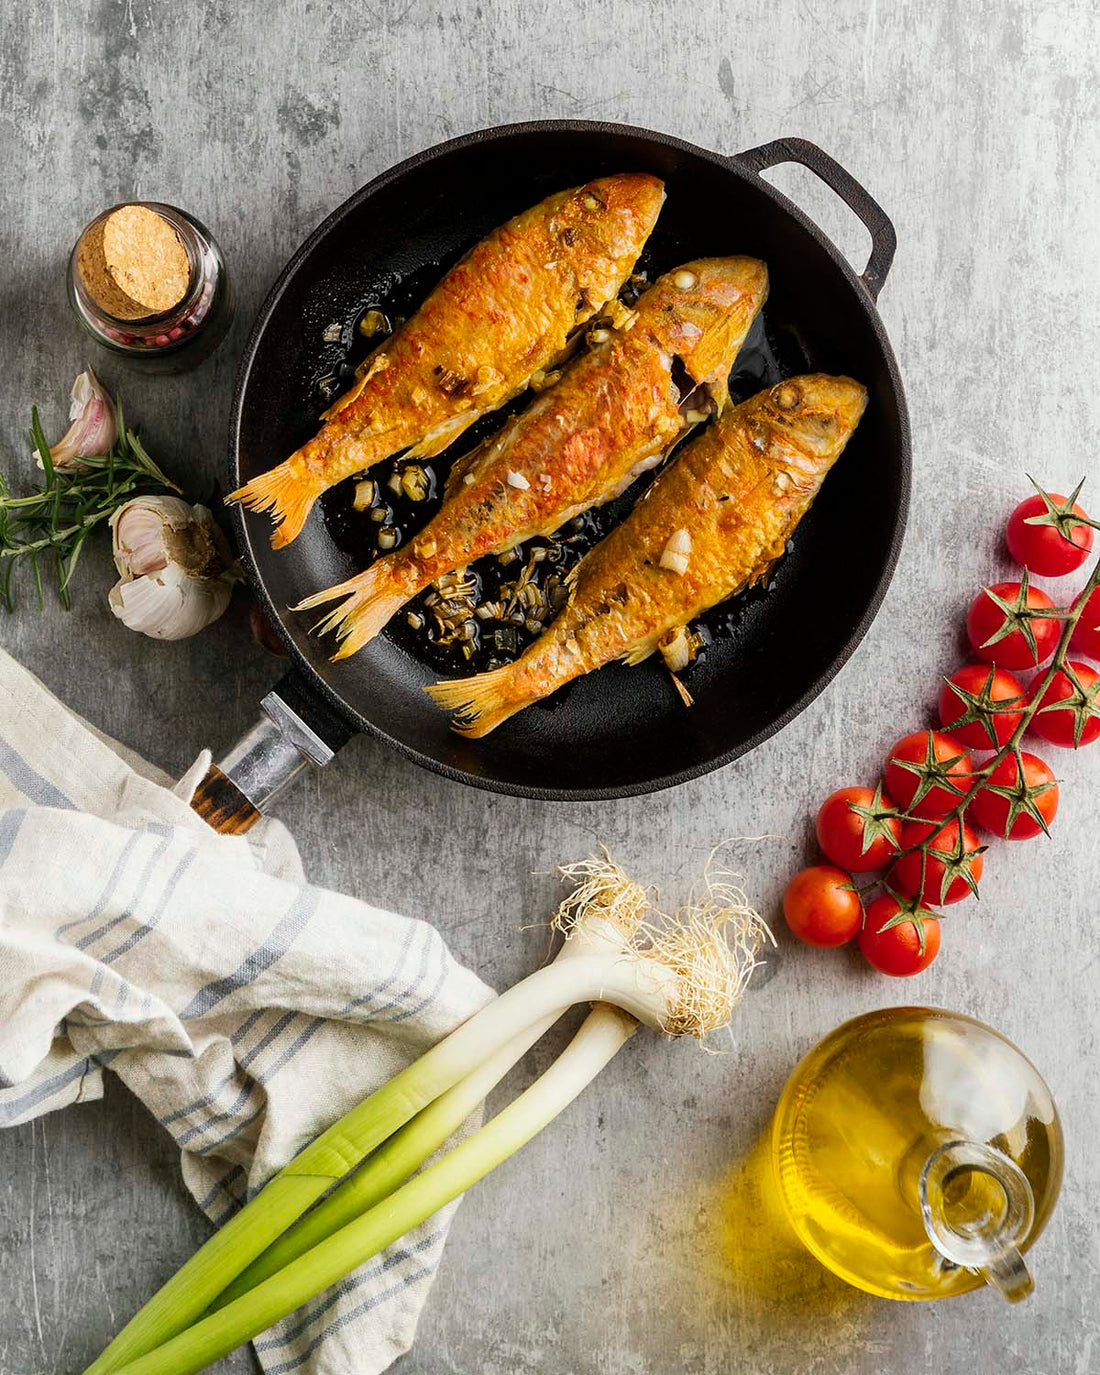 Best Pan To Cook Fish